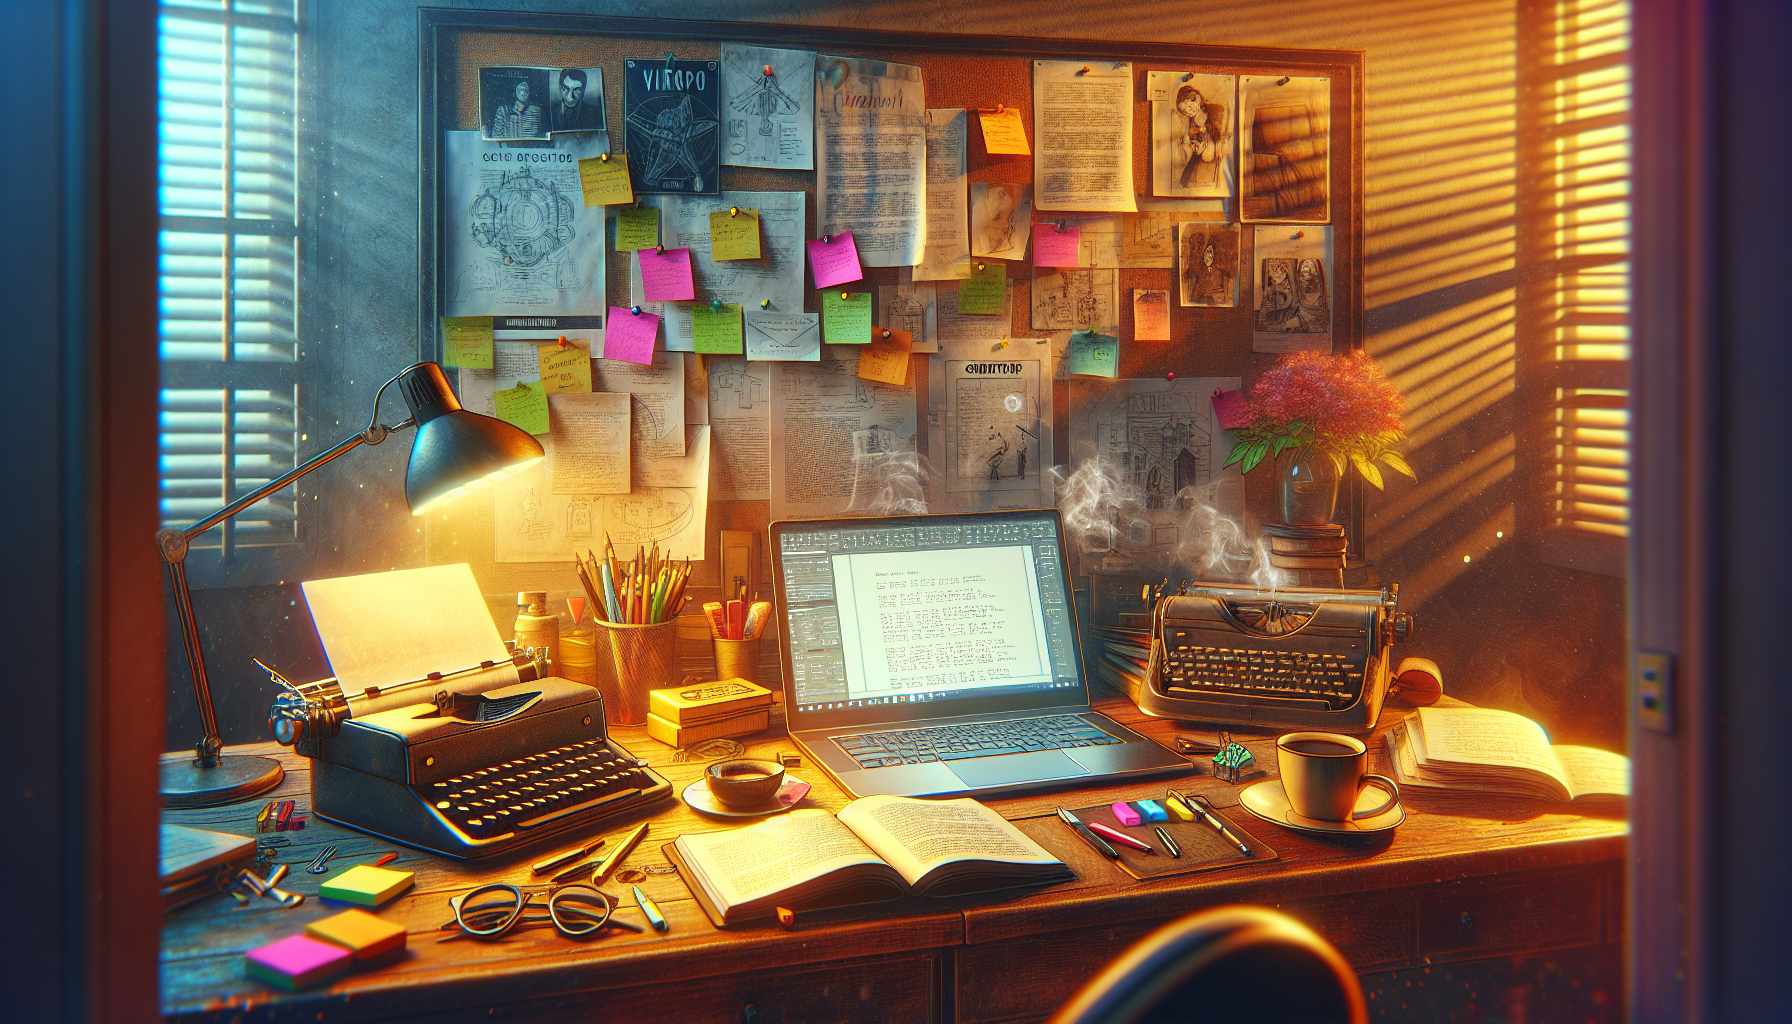 An artistic digital workspace depicting a variety of modern scriptwriting tools on a wooden desk, illuminated by soft, ambient light. The scene includes a sleek laptop open to a scriptwriting software, vintage typewriter, scattered screenplay pages, colorful sticky notes, and a steaming cup of coffee. In the background, there's a bulletin board filled with character sketches and plot diagrams, all encased in a cozy, creative home office setting.